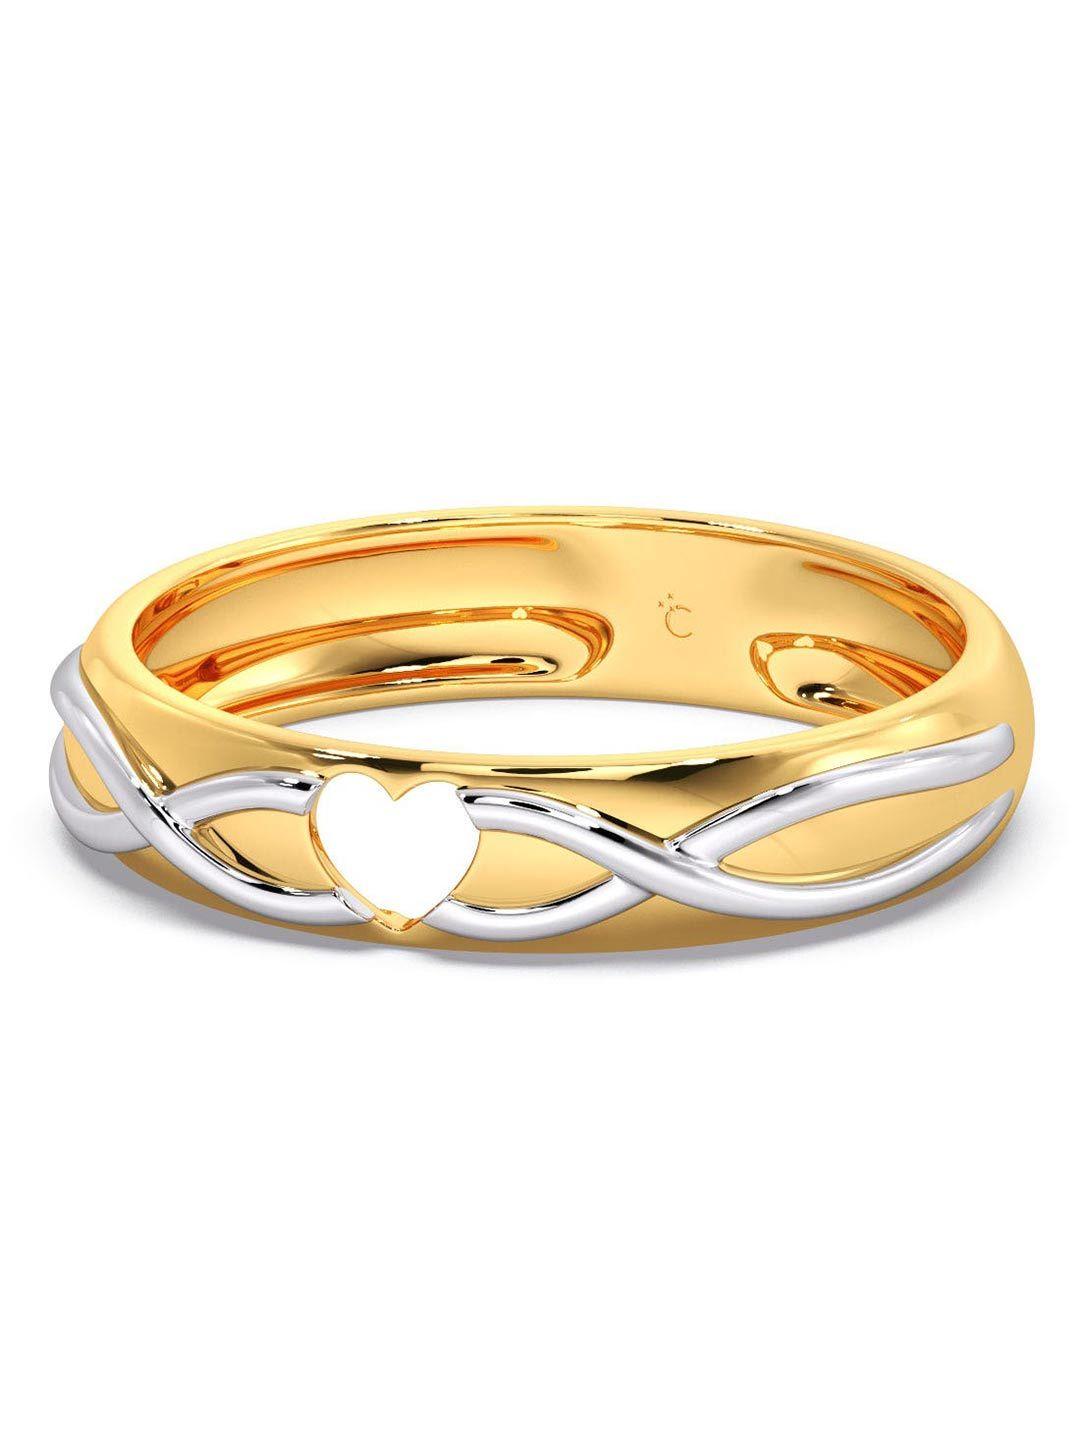 candere a kalyan jewellers company 14kt gold heart band ring-2.55gm